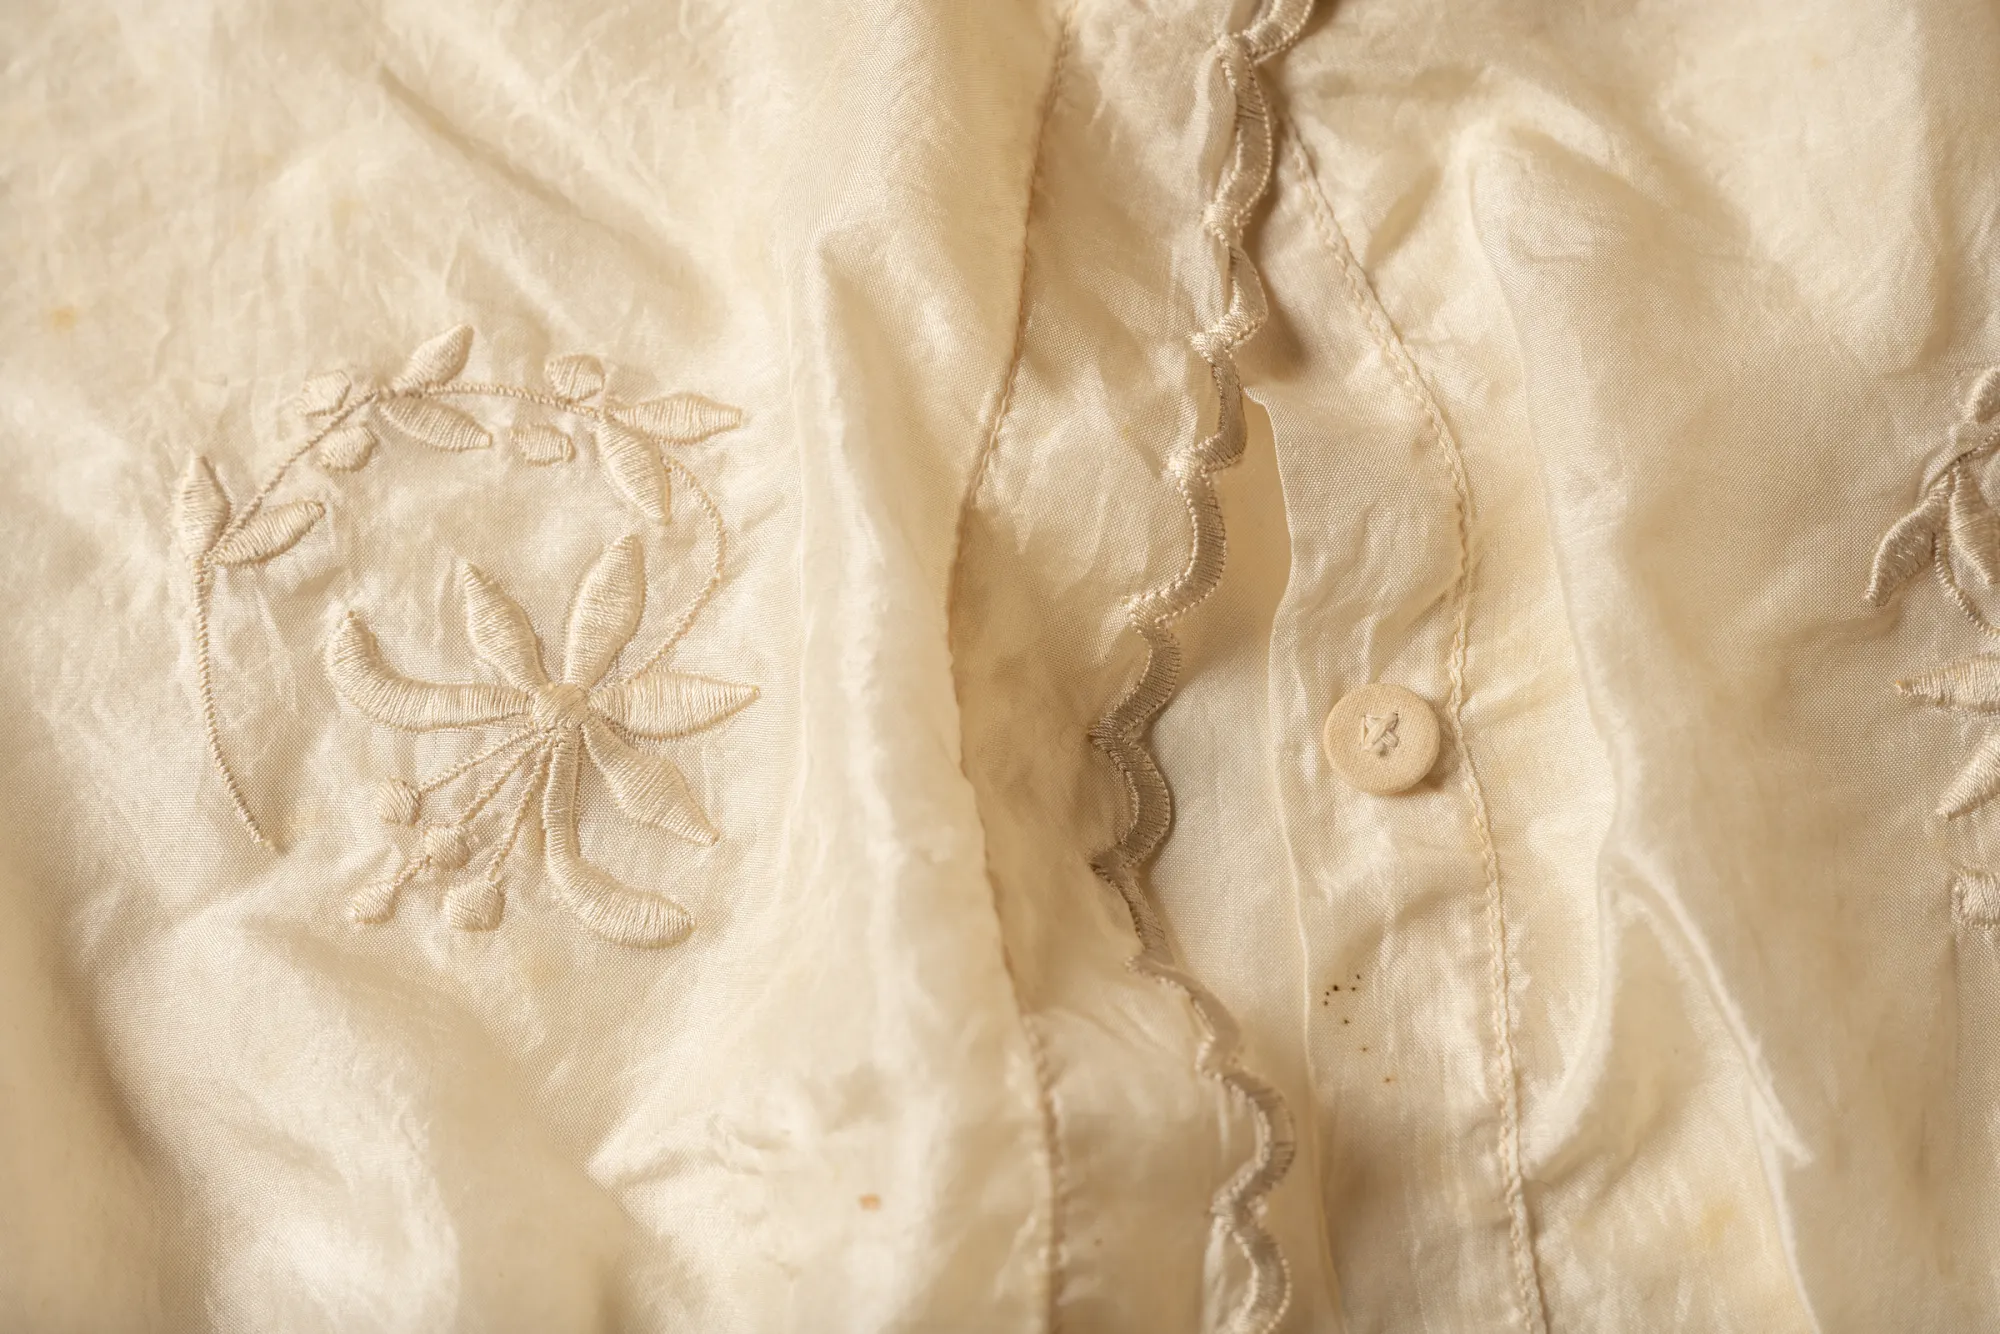 Detail of a corset cover